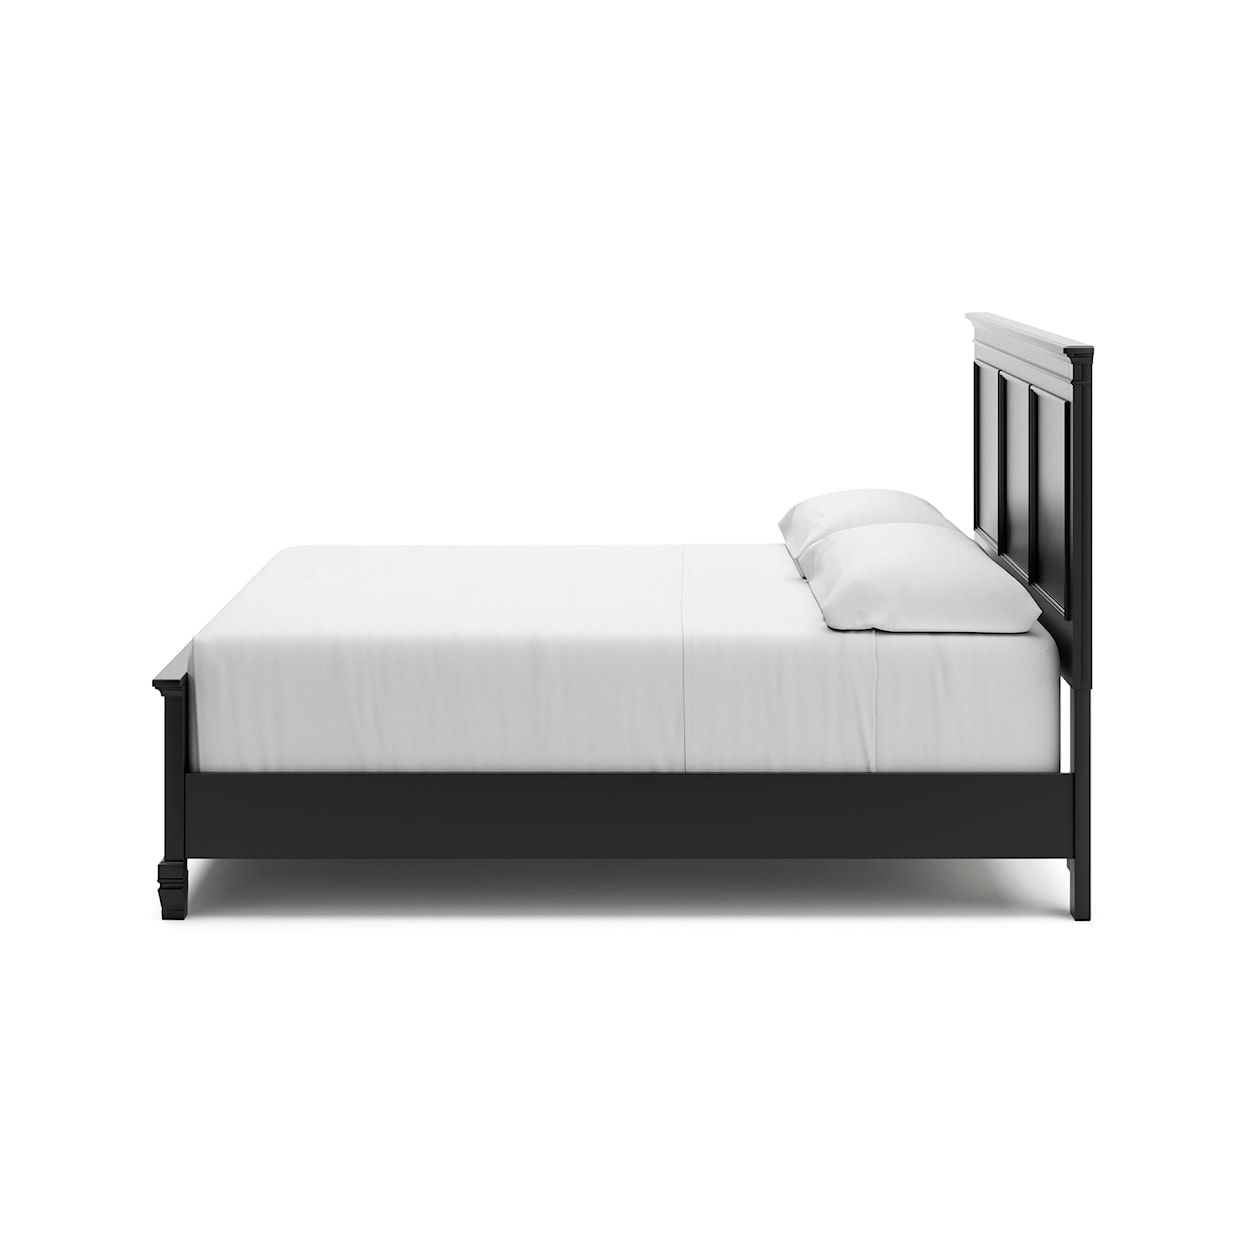 Signature Lanolee King Panel Bed